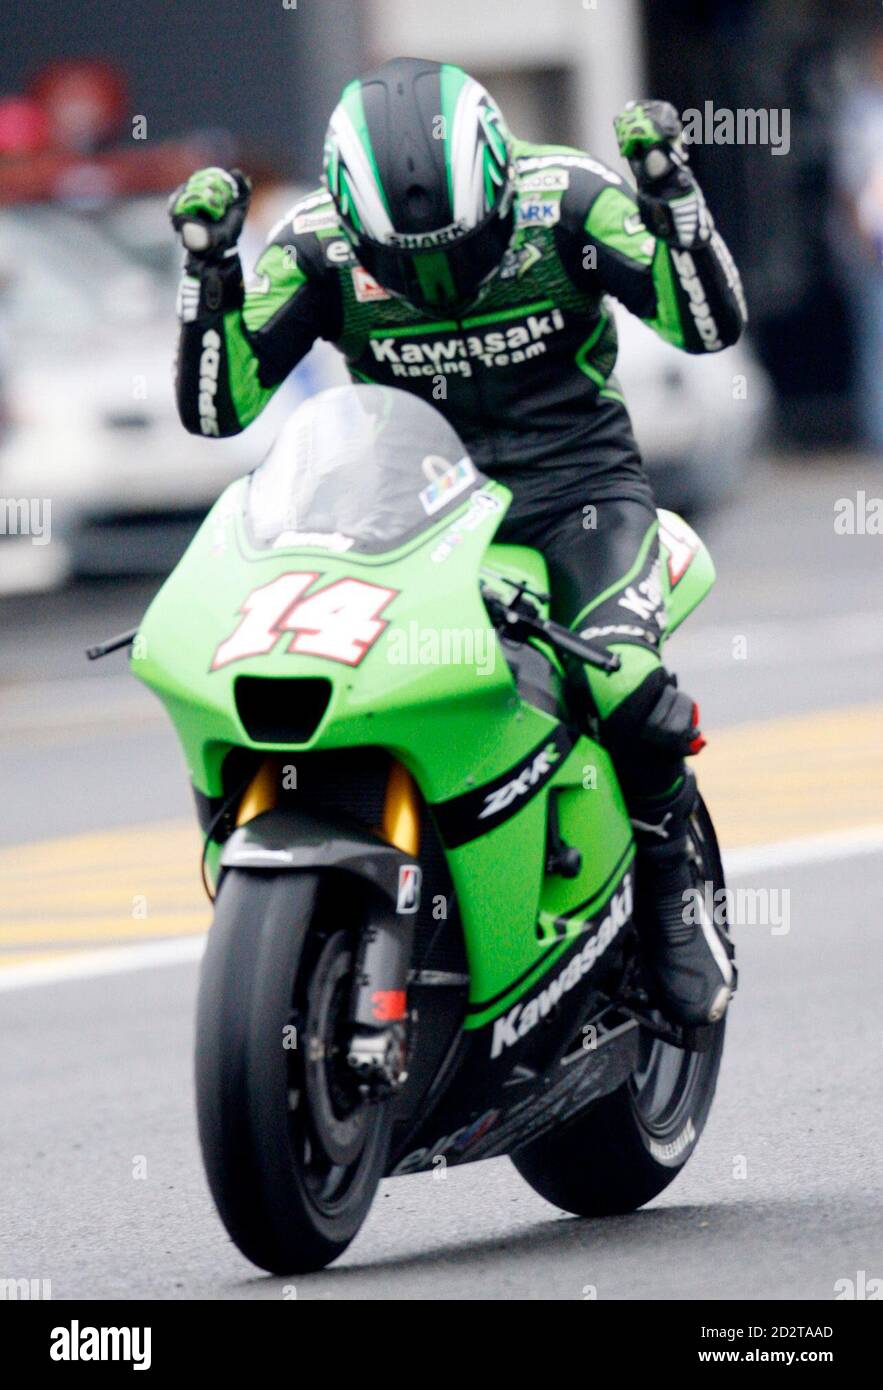 Kawasaki MotoGP rider Randy de Puniet of France reacts as he finishes the last at the Japanese Prix in Motegi, north of Tokyo September 23, 2007. de Puniet finished